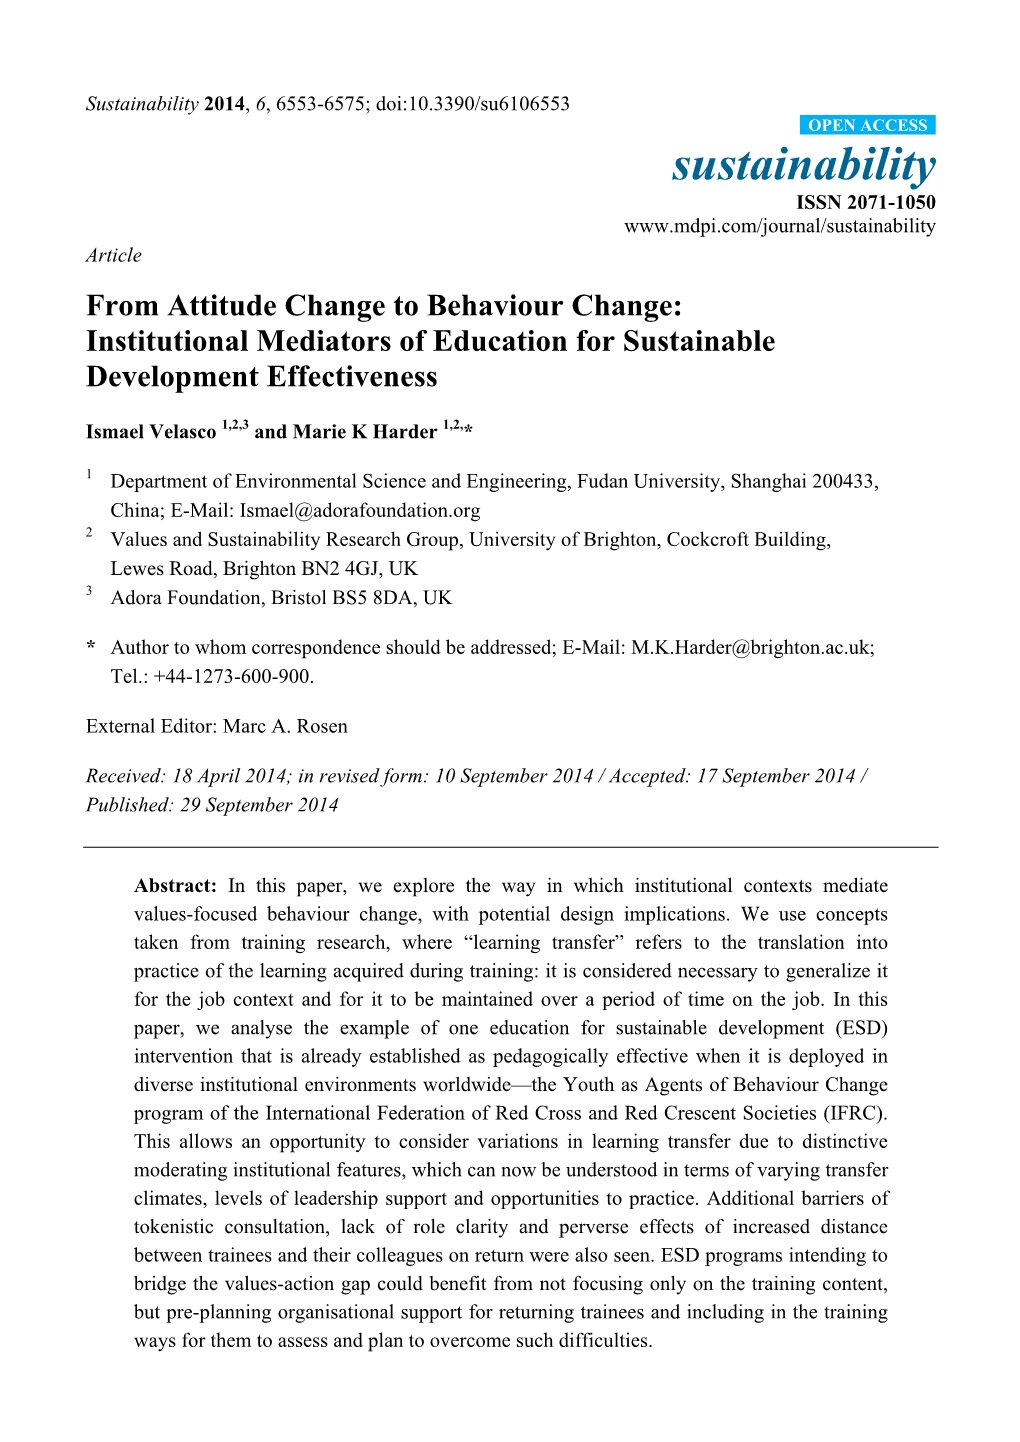 From Attitude Change to Behaviour Change: Institutional Mediators of Education for Sustainable Development Effectiveness